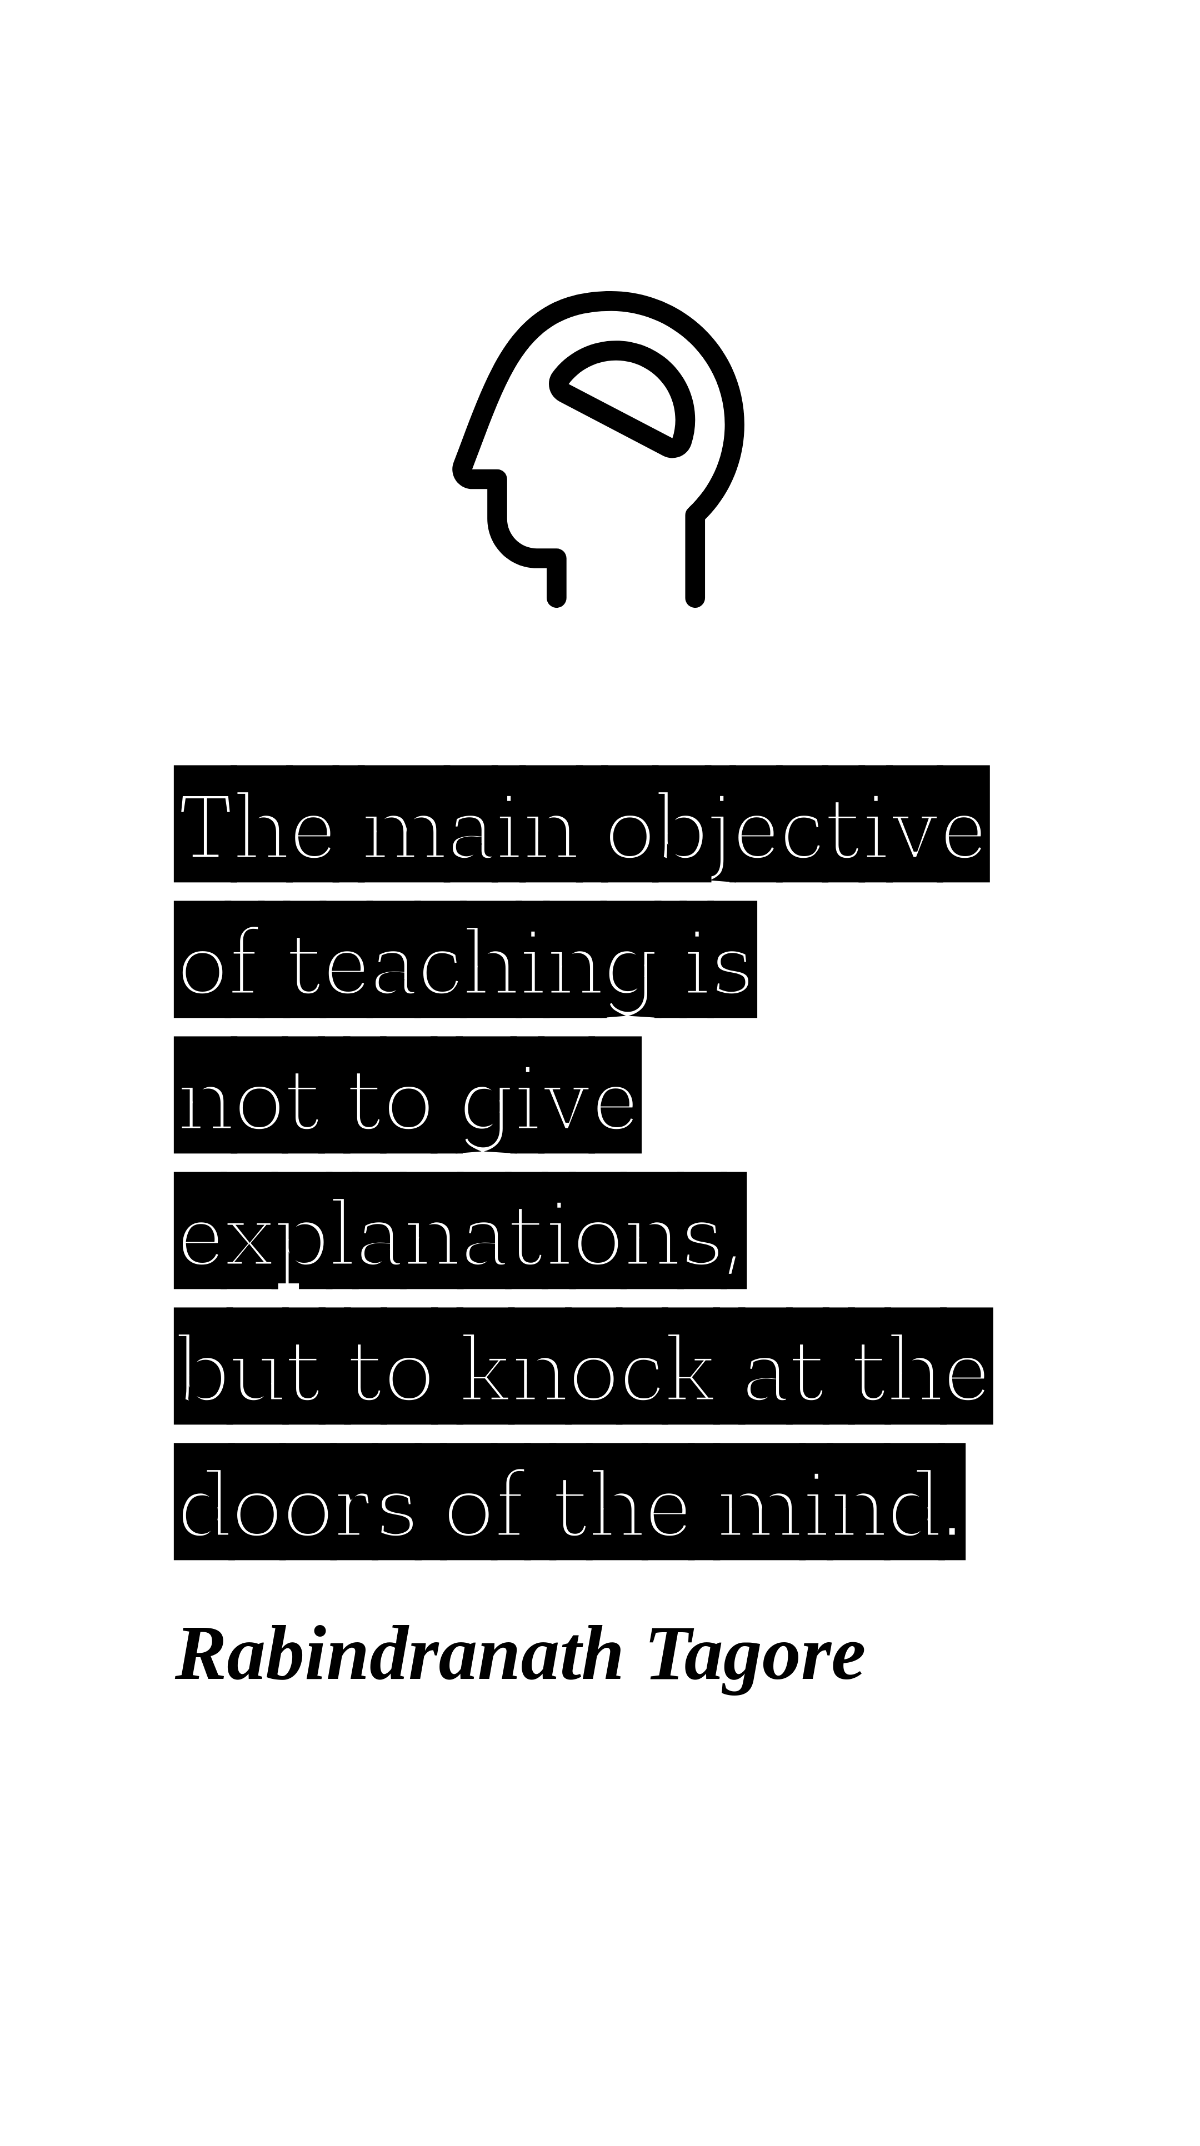 Rabindranath Tagore - The main objective of teaching is not to give explanations, but to knock at the doors of the mind. Template